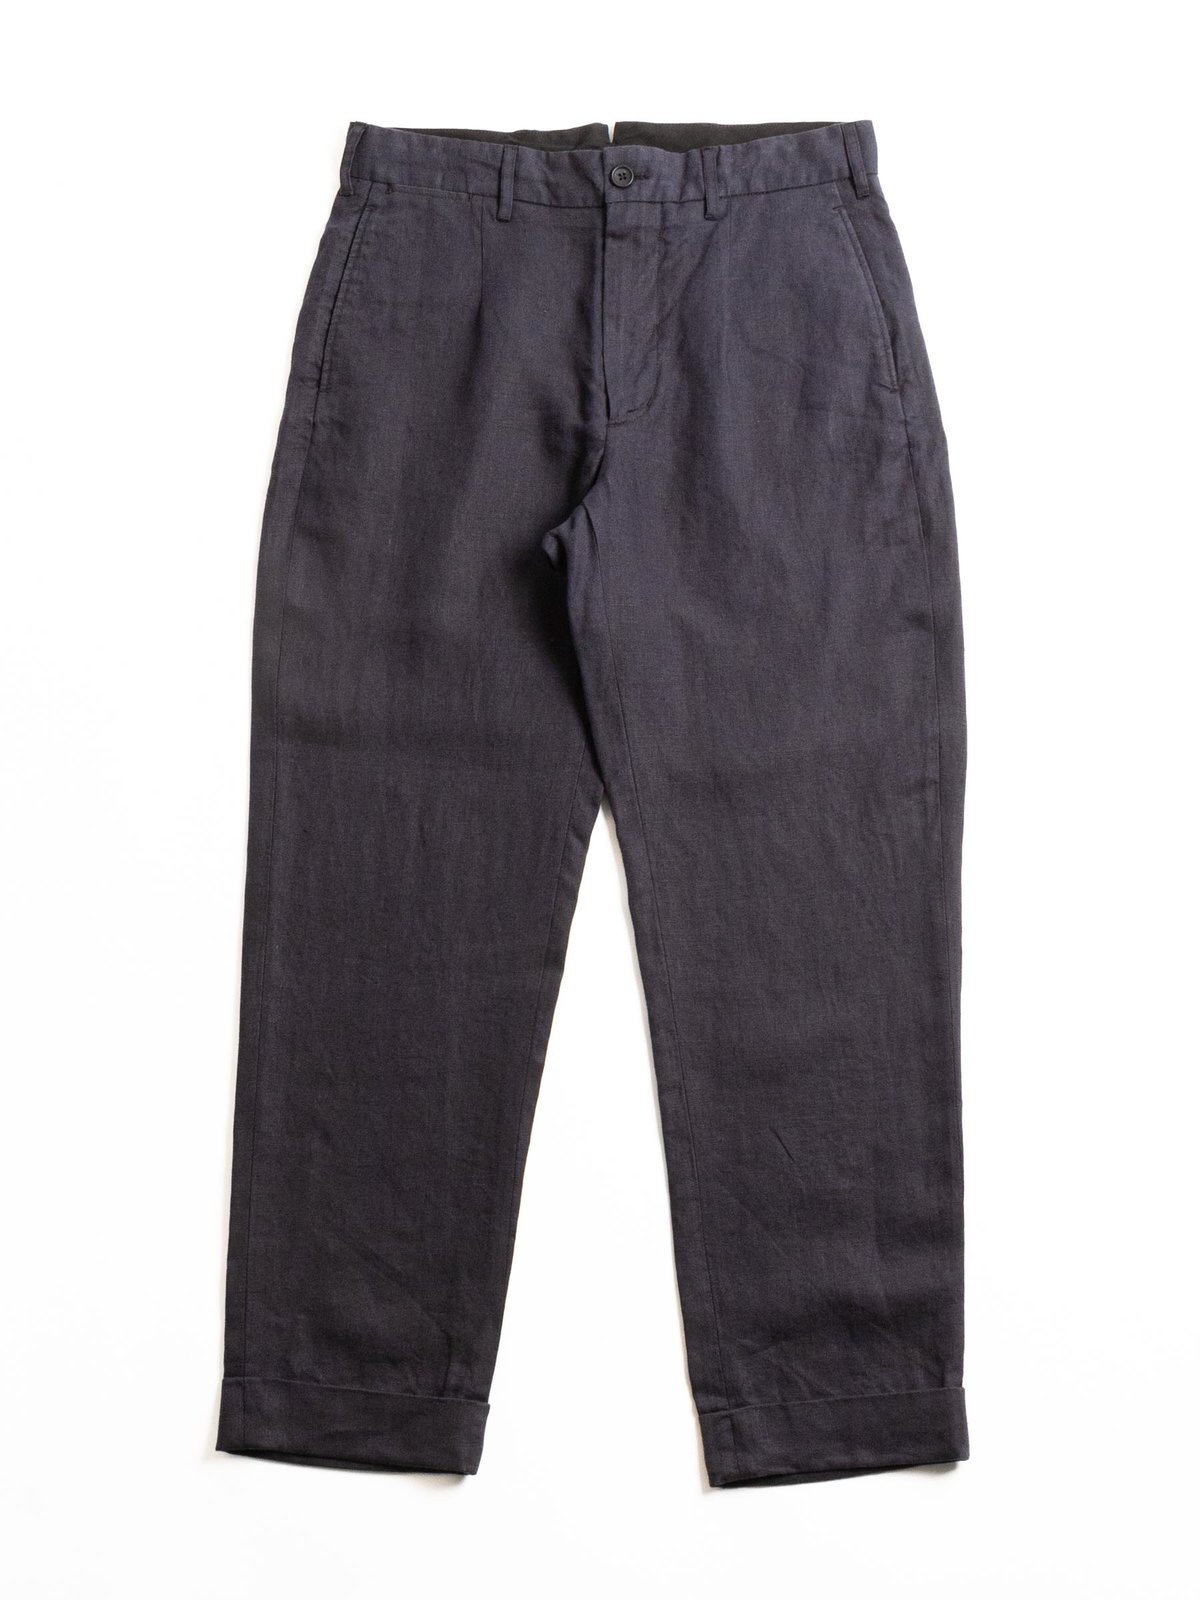 ANDOVER PANT NAVY LINEN TWILL - Image 1